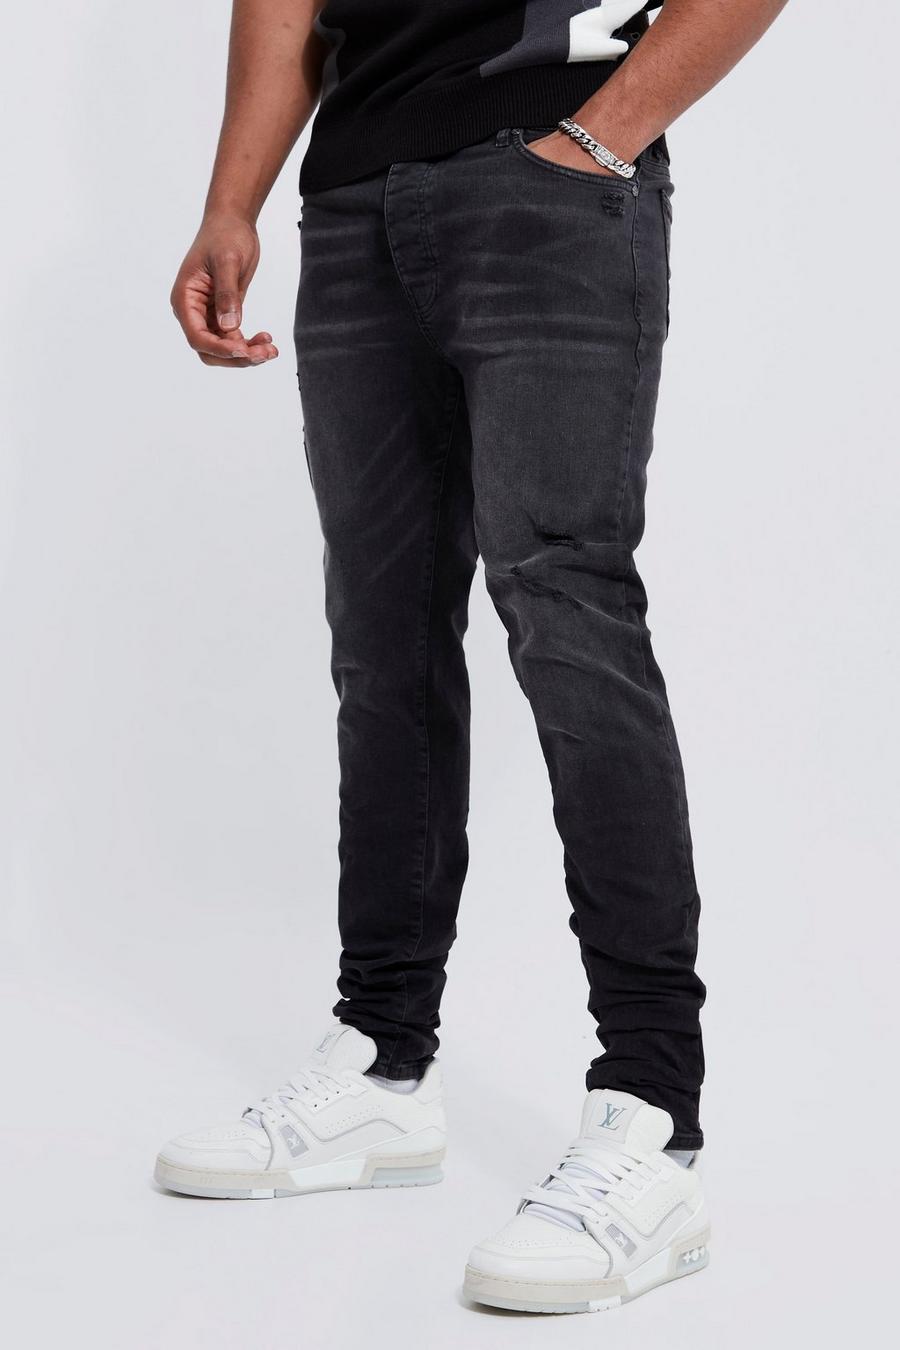 Washed black Tall Skinny Stretch Distressed Jeans